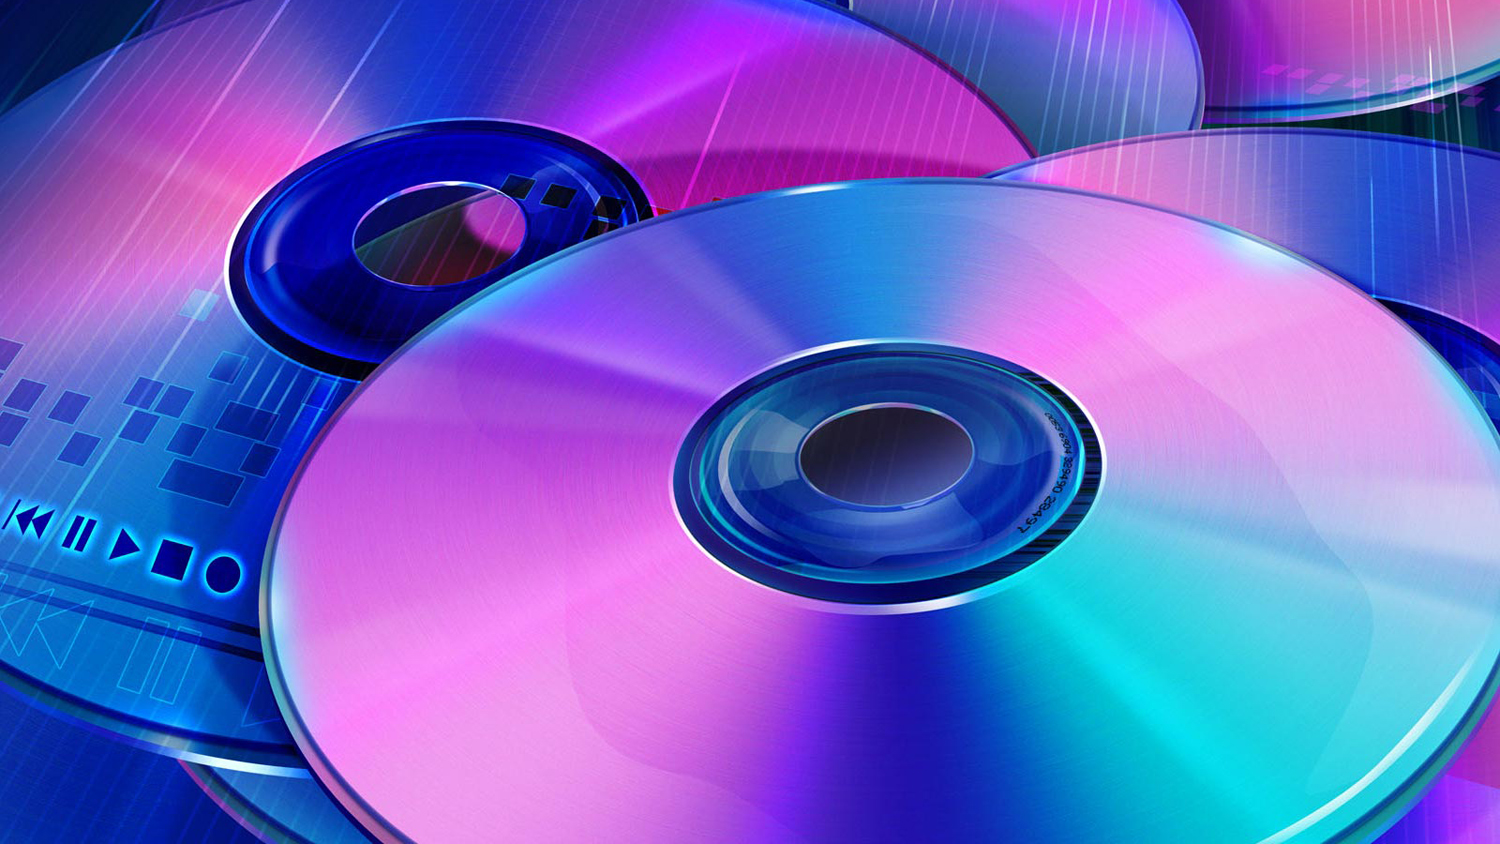 CDs are back! Compact disc sales just rose for the first time in ...